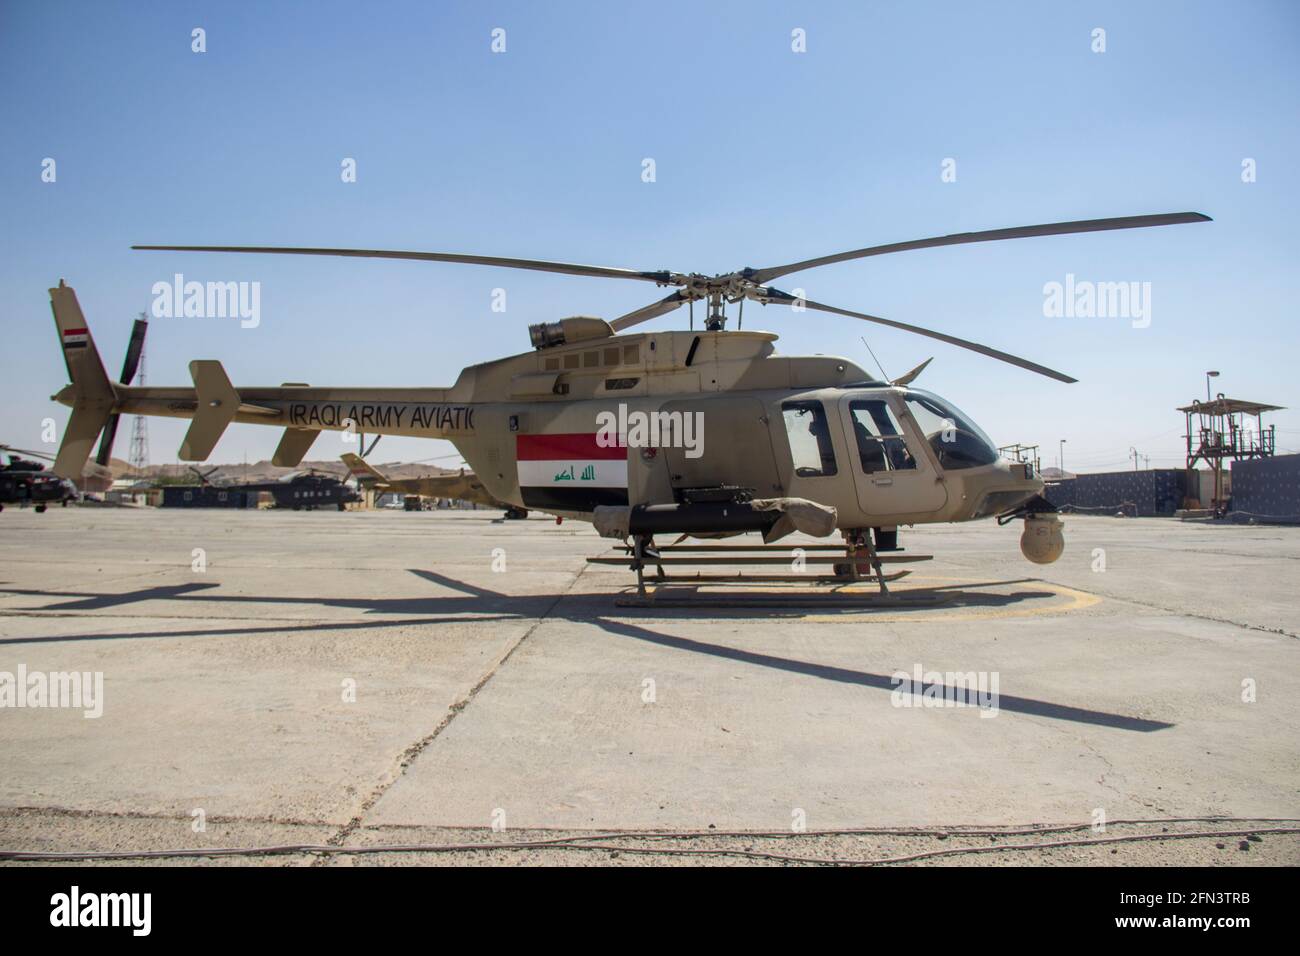 An Iraqi Army Aviation Bell 407GT light attack helicopter at a base during the 2016-2017 Mosul Operation. Stock Photo